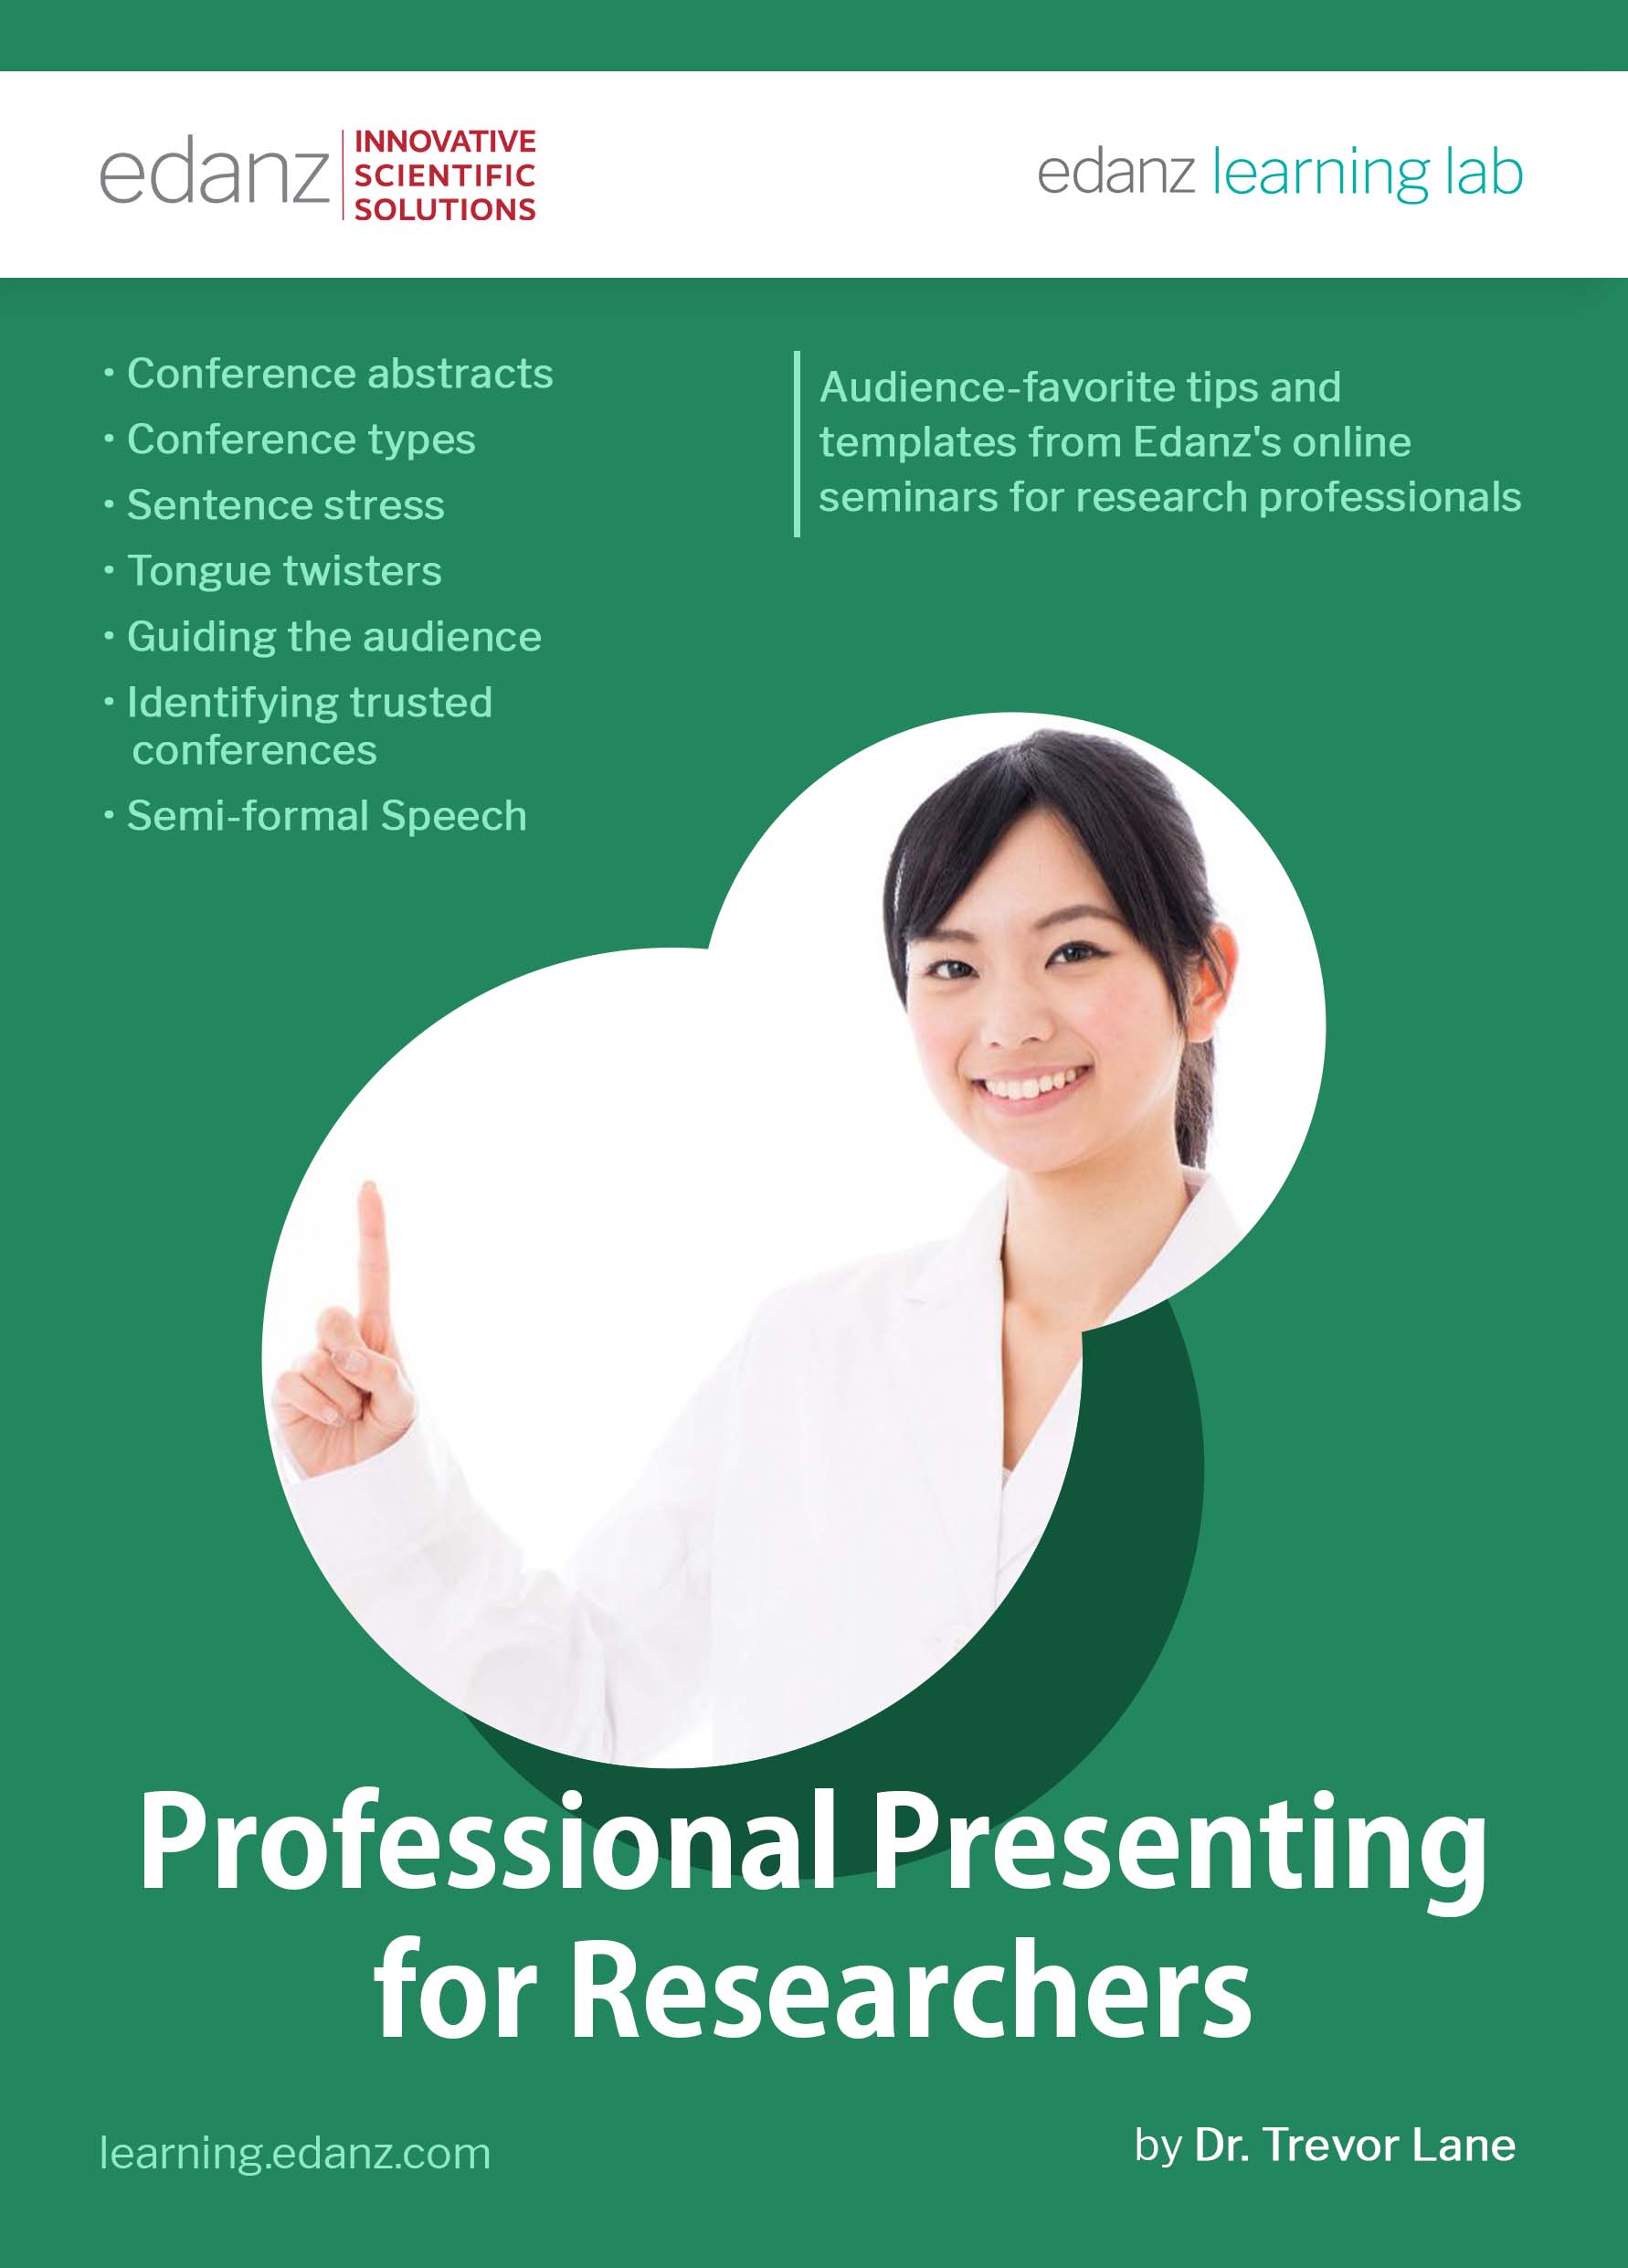 Professional Presenting for Researchers